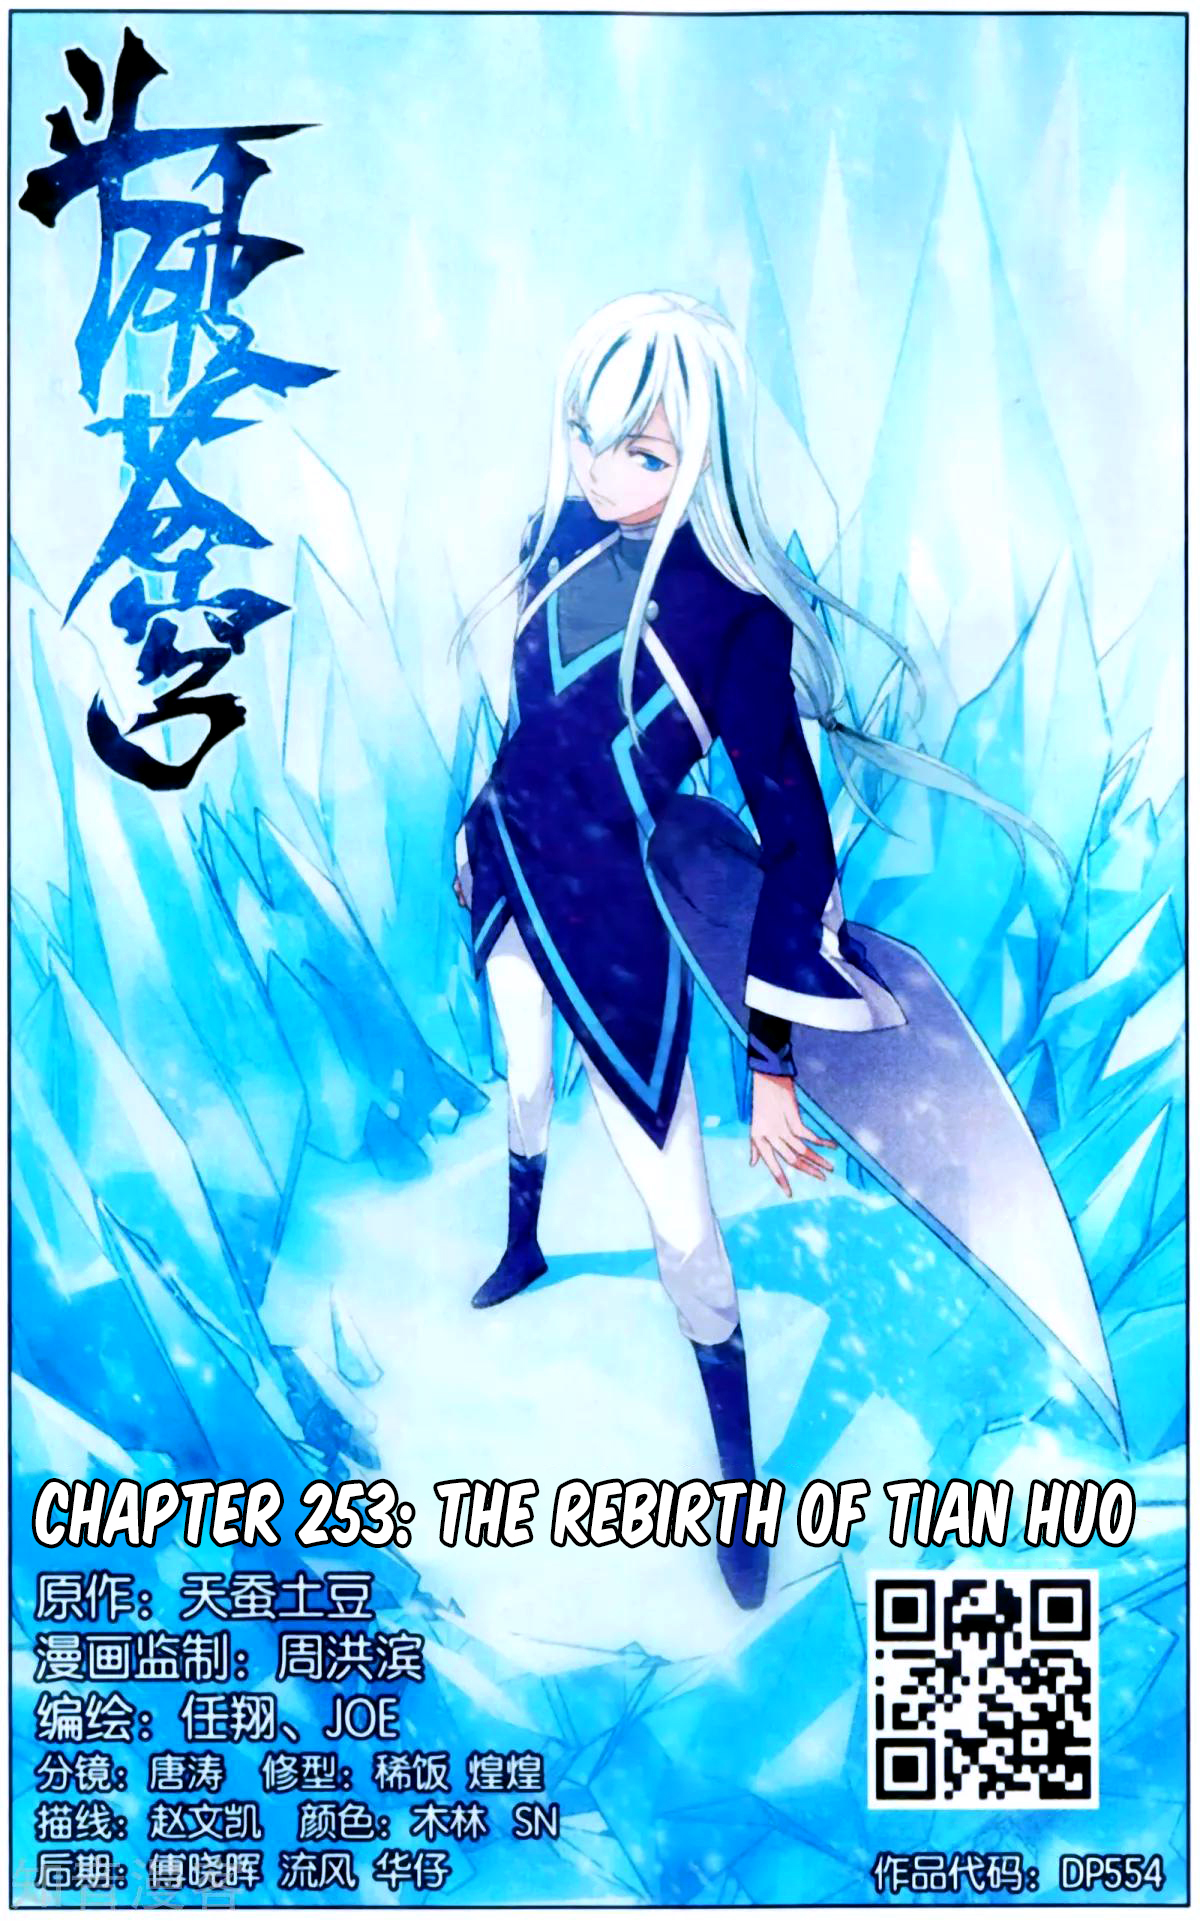 Fights Breaking Through The Heavens Ch. 253 The Rebirth of Tian Huo